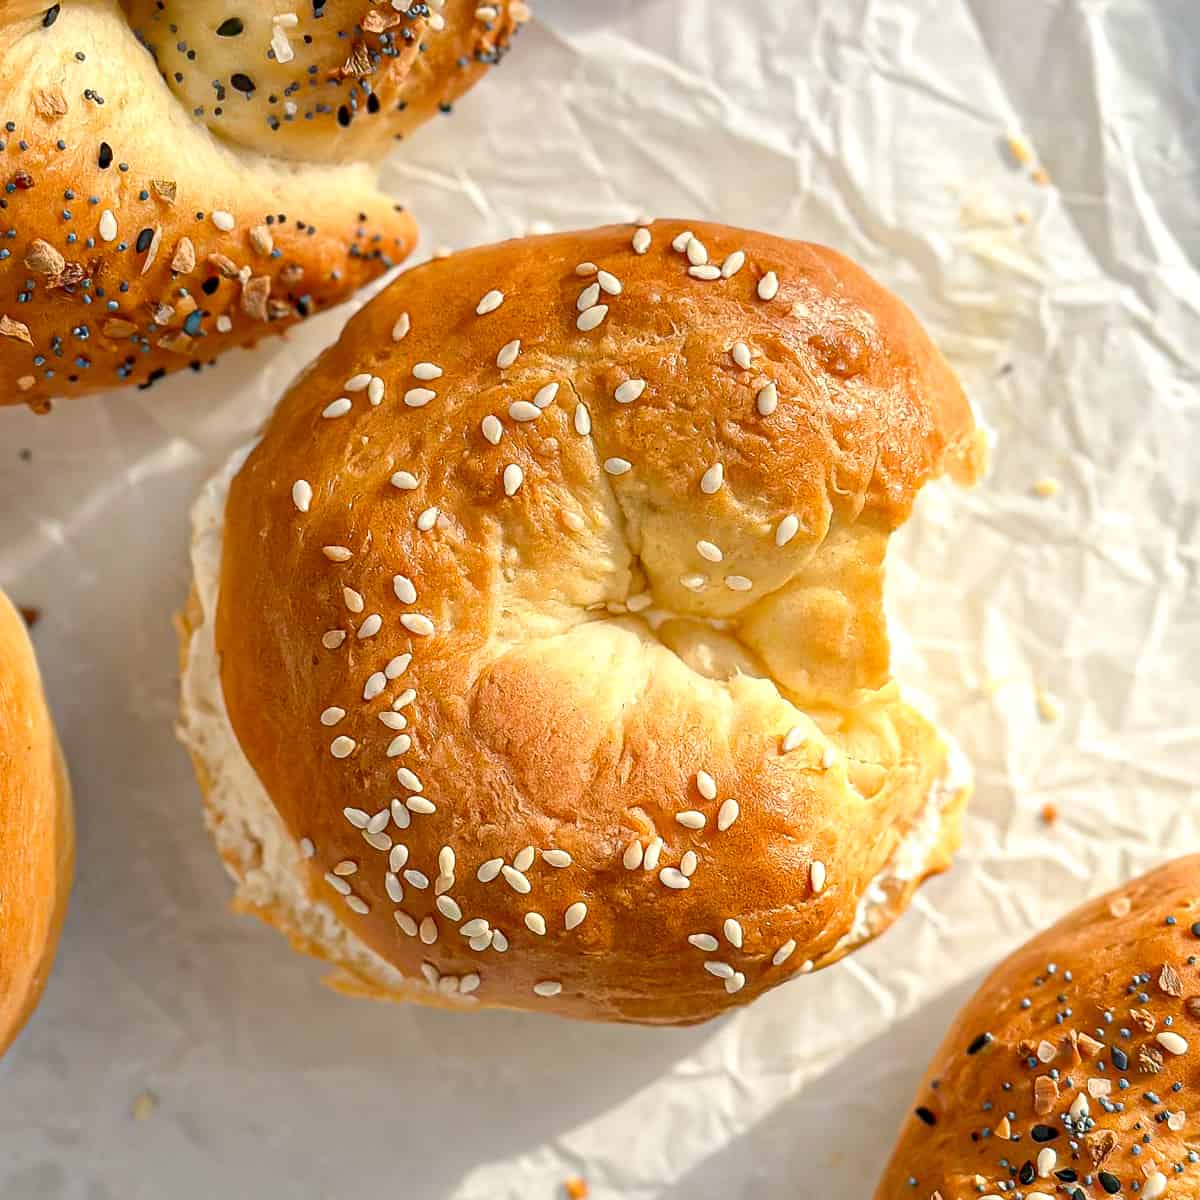 A sesame seed 2 Ingredient bagel with cream cheese with a bite taken out.